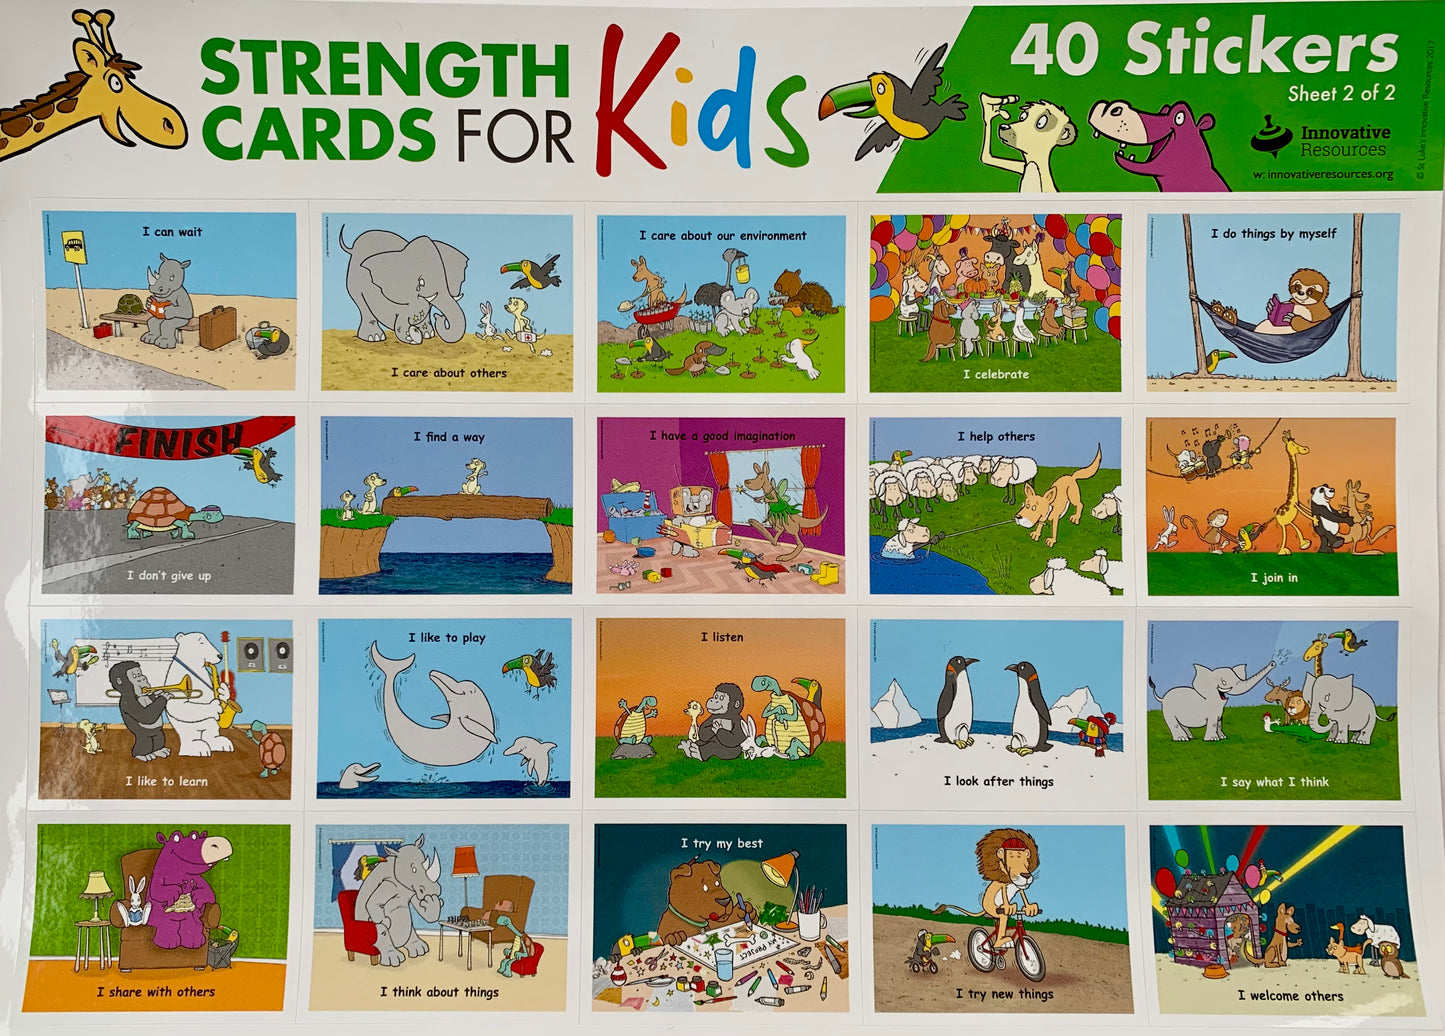 Strengths Stickers for Kids (40 stickers)